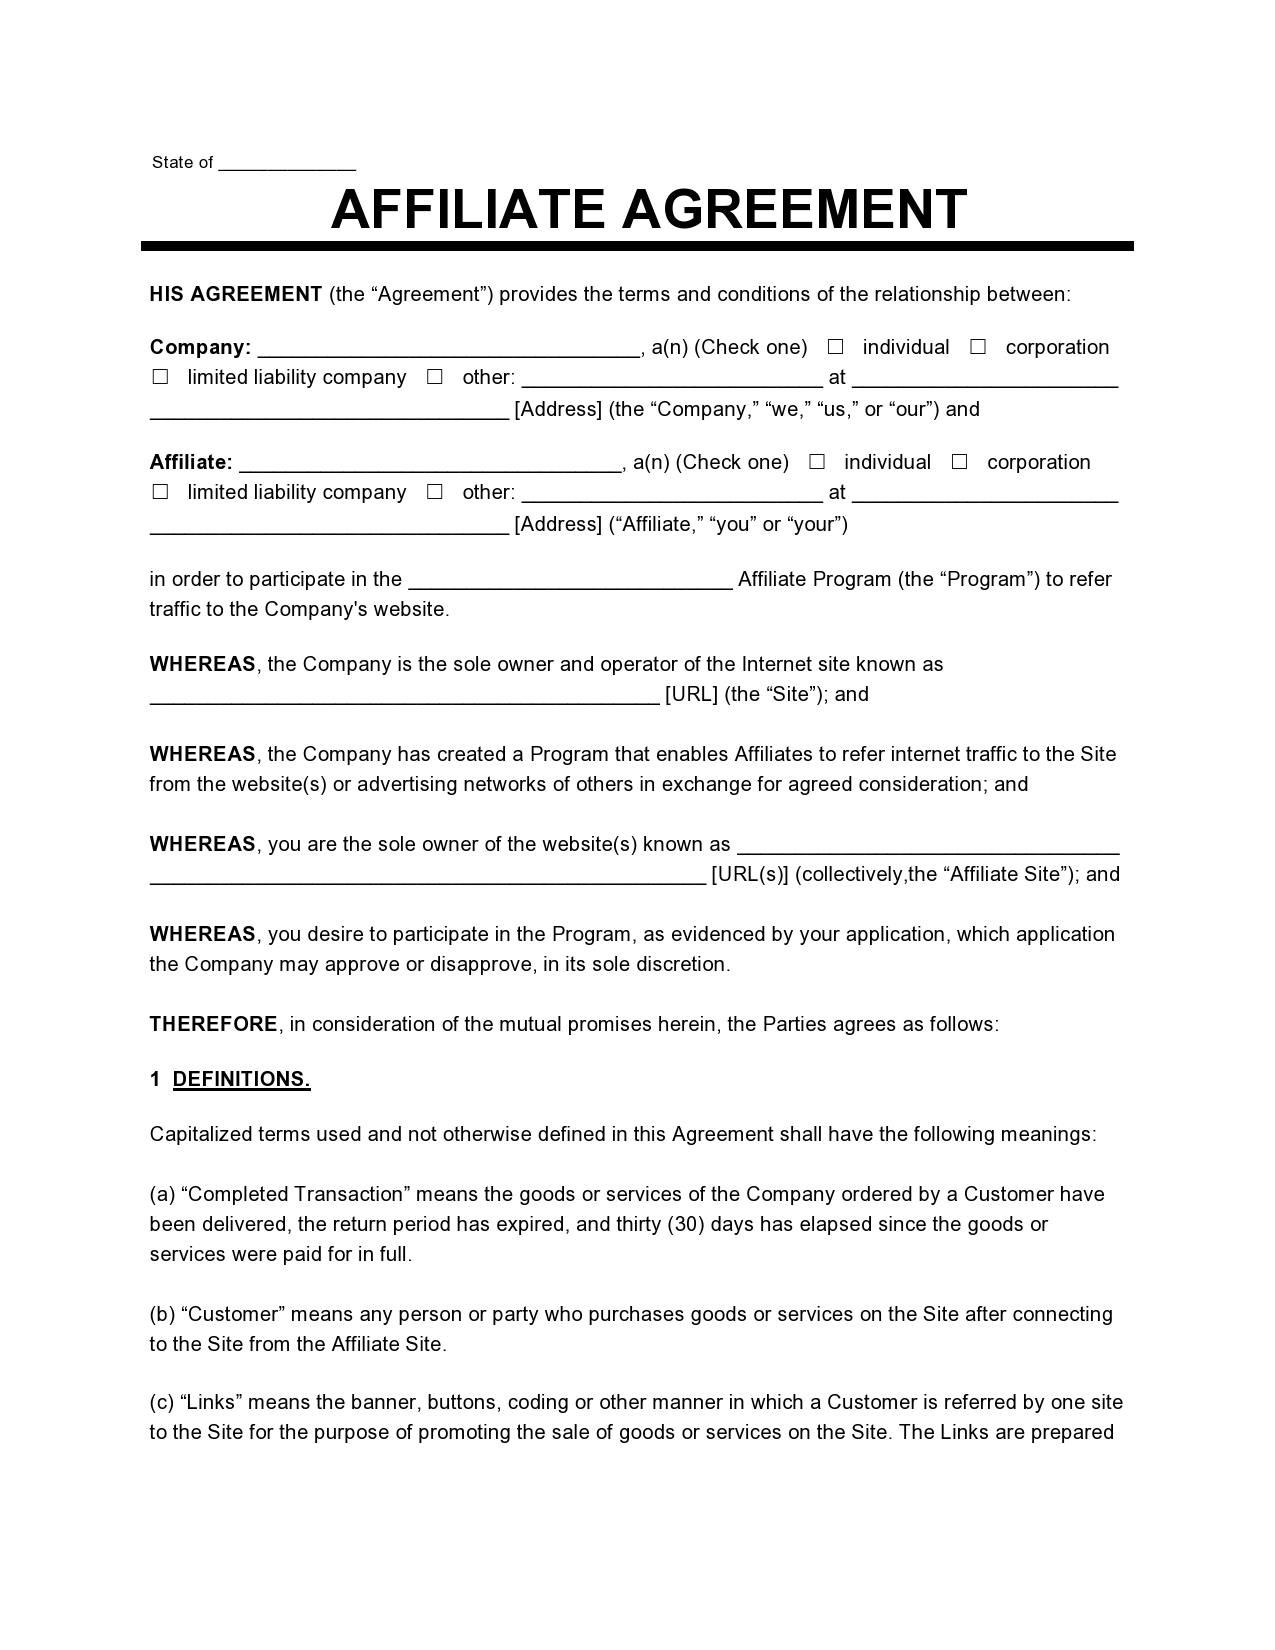 Free affiliate agreement 01